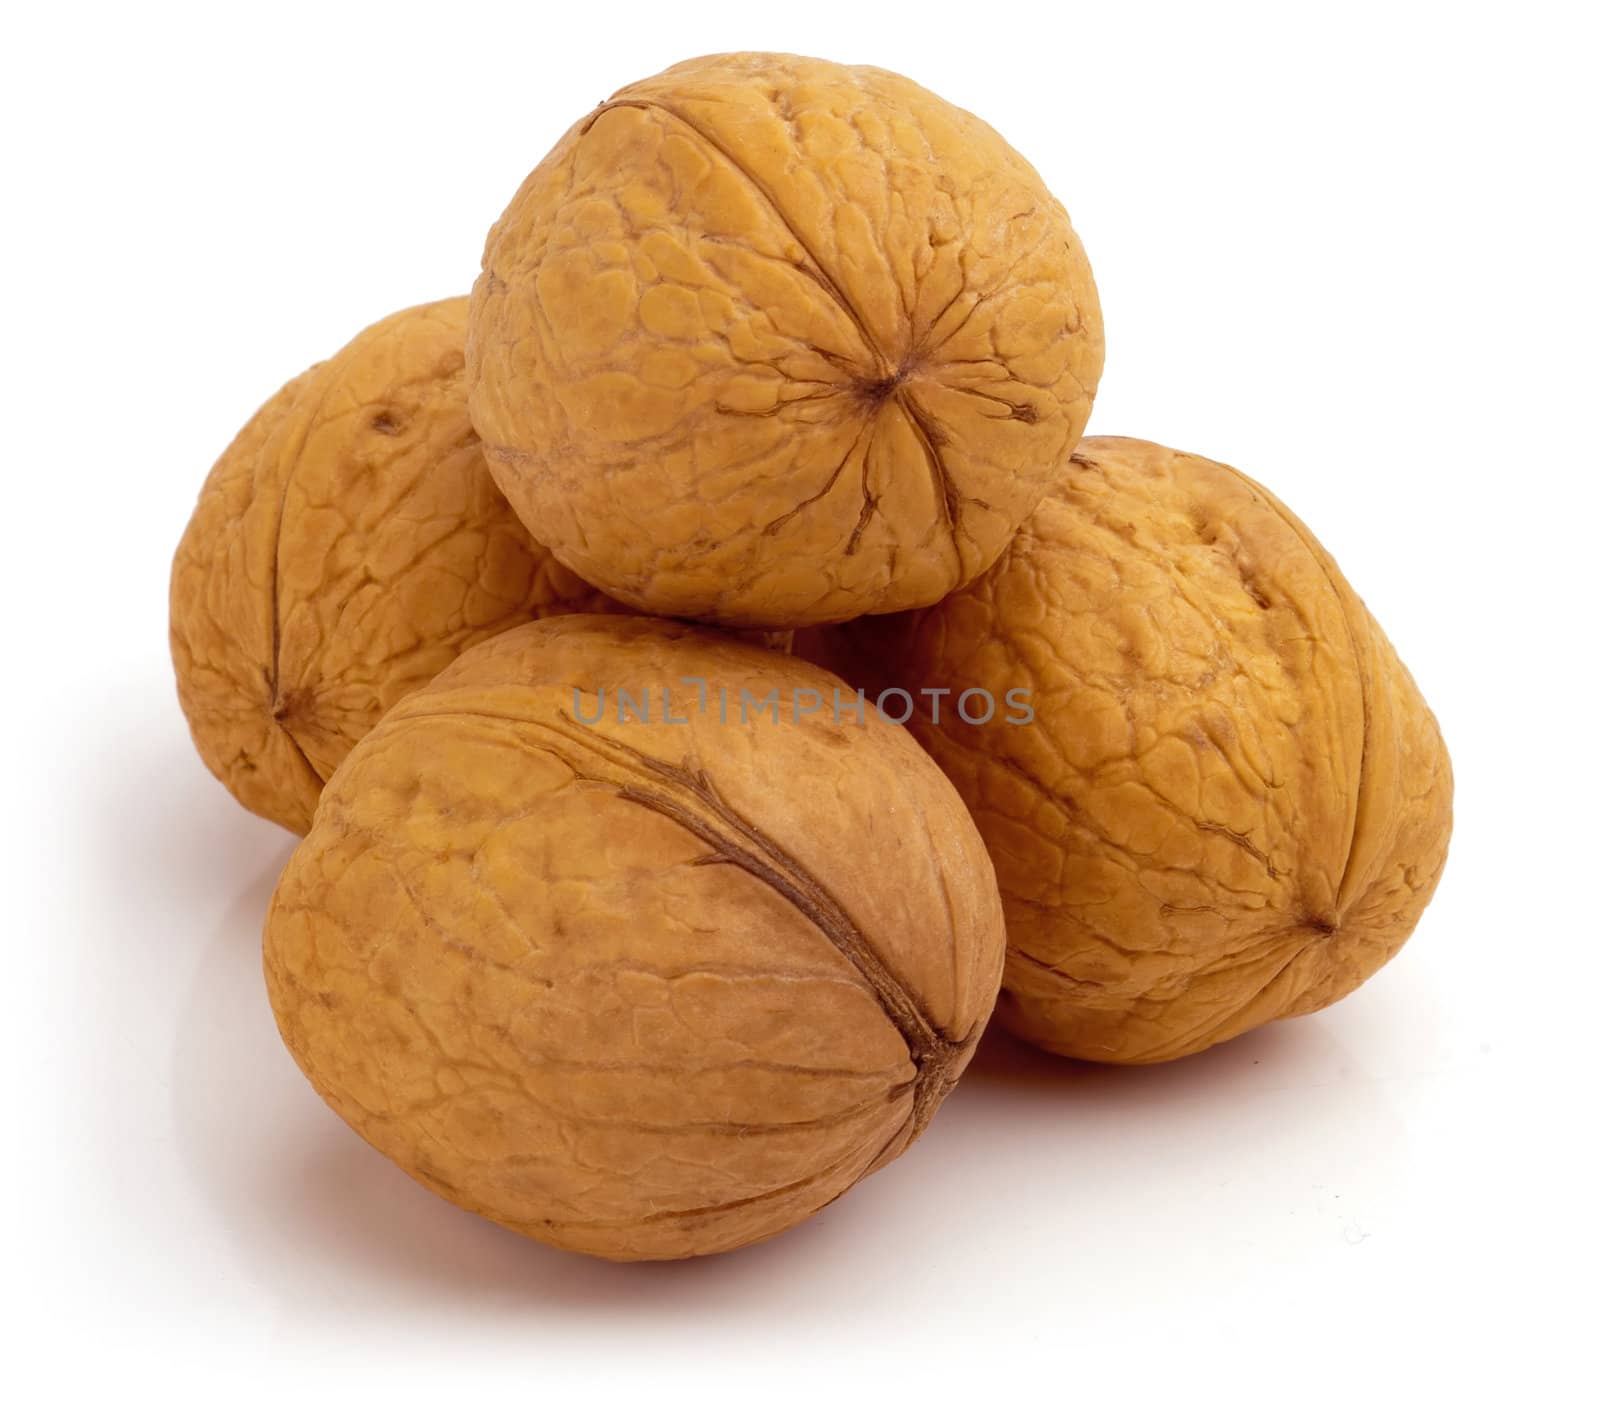 Stack of four walnuts. Isolated on a white background.